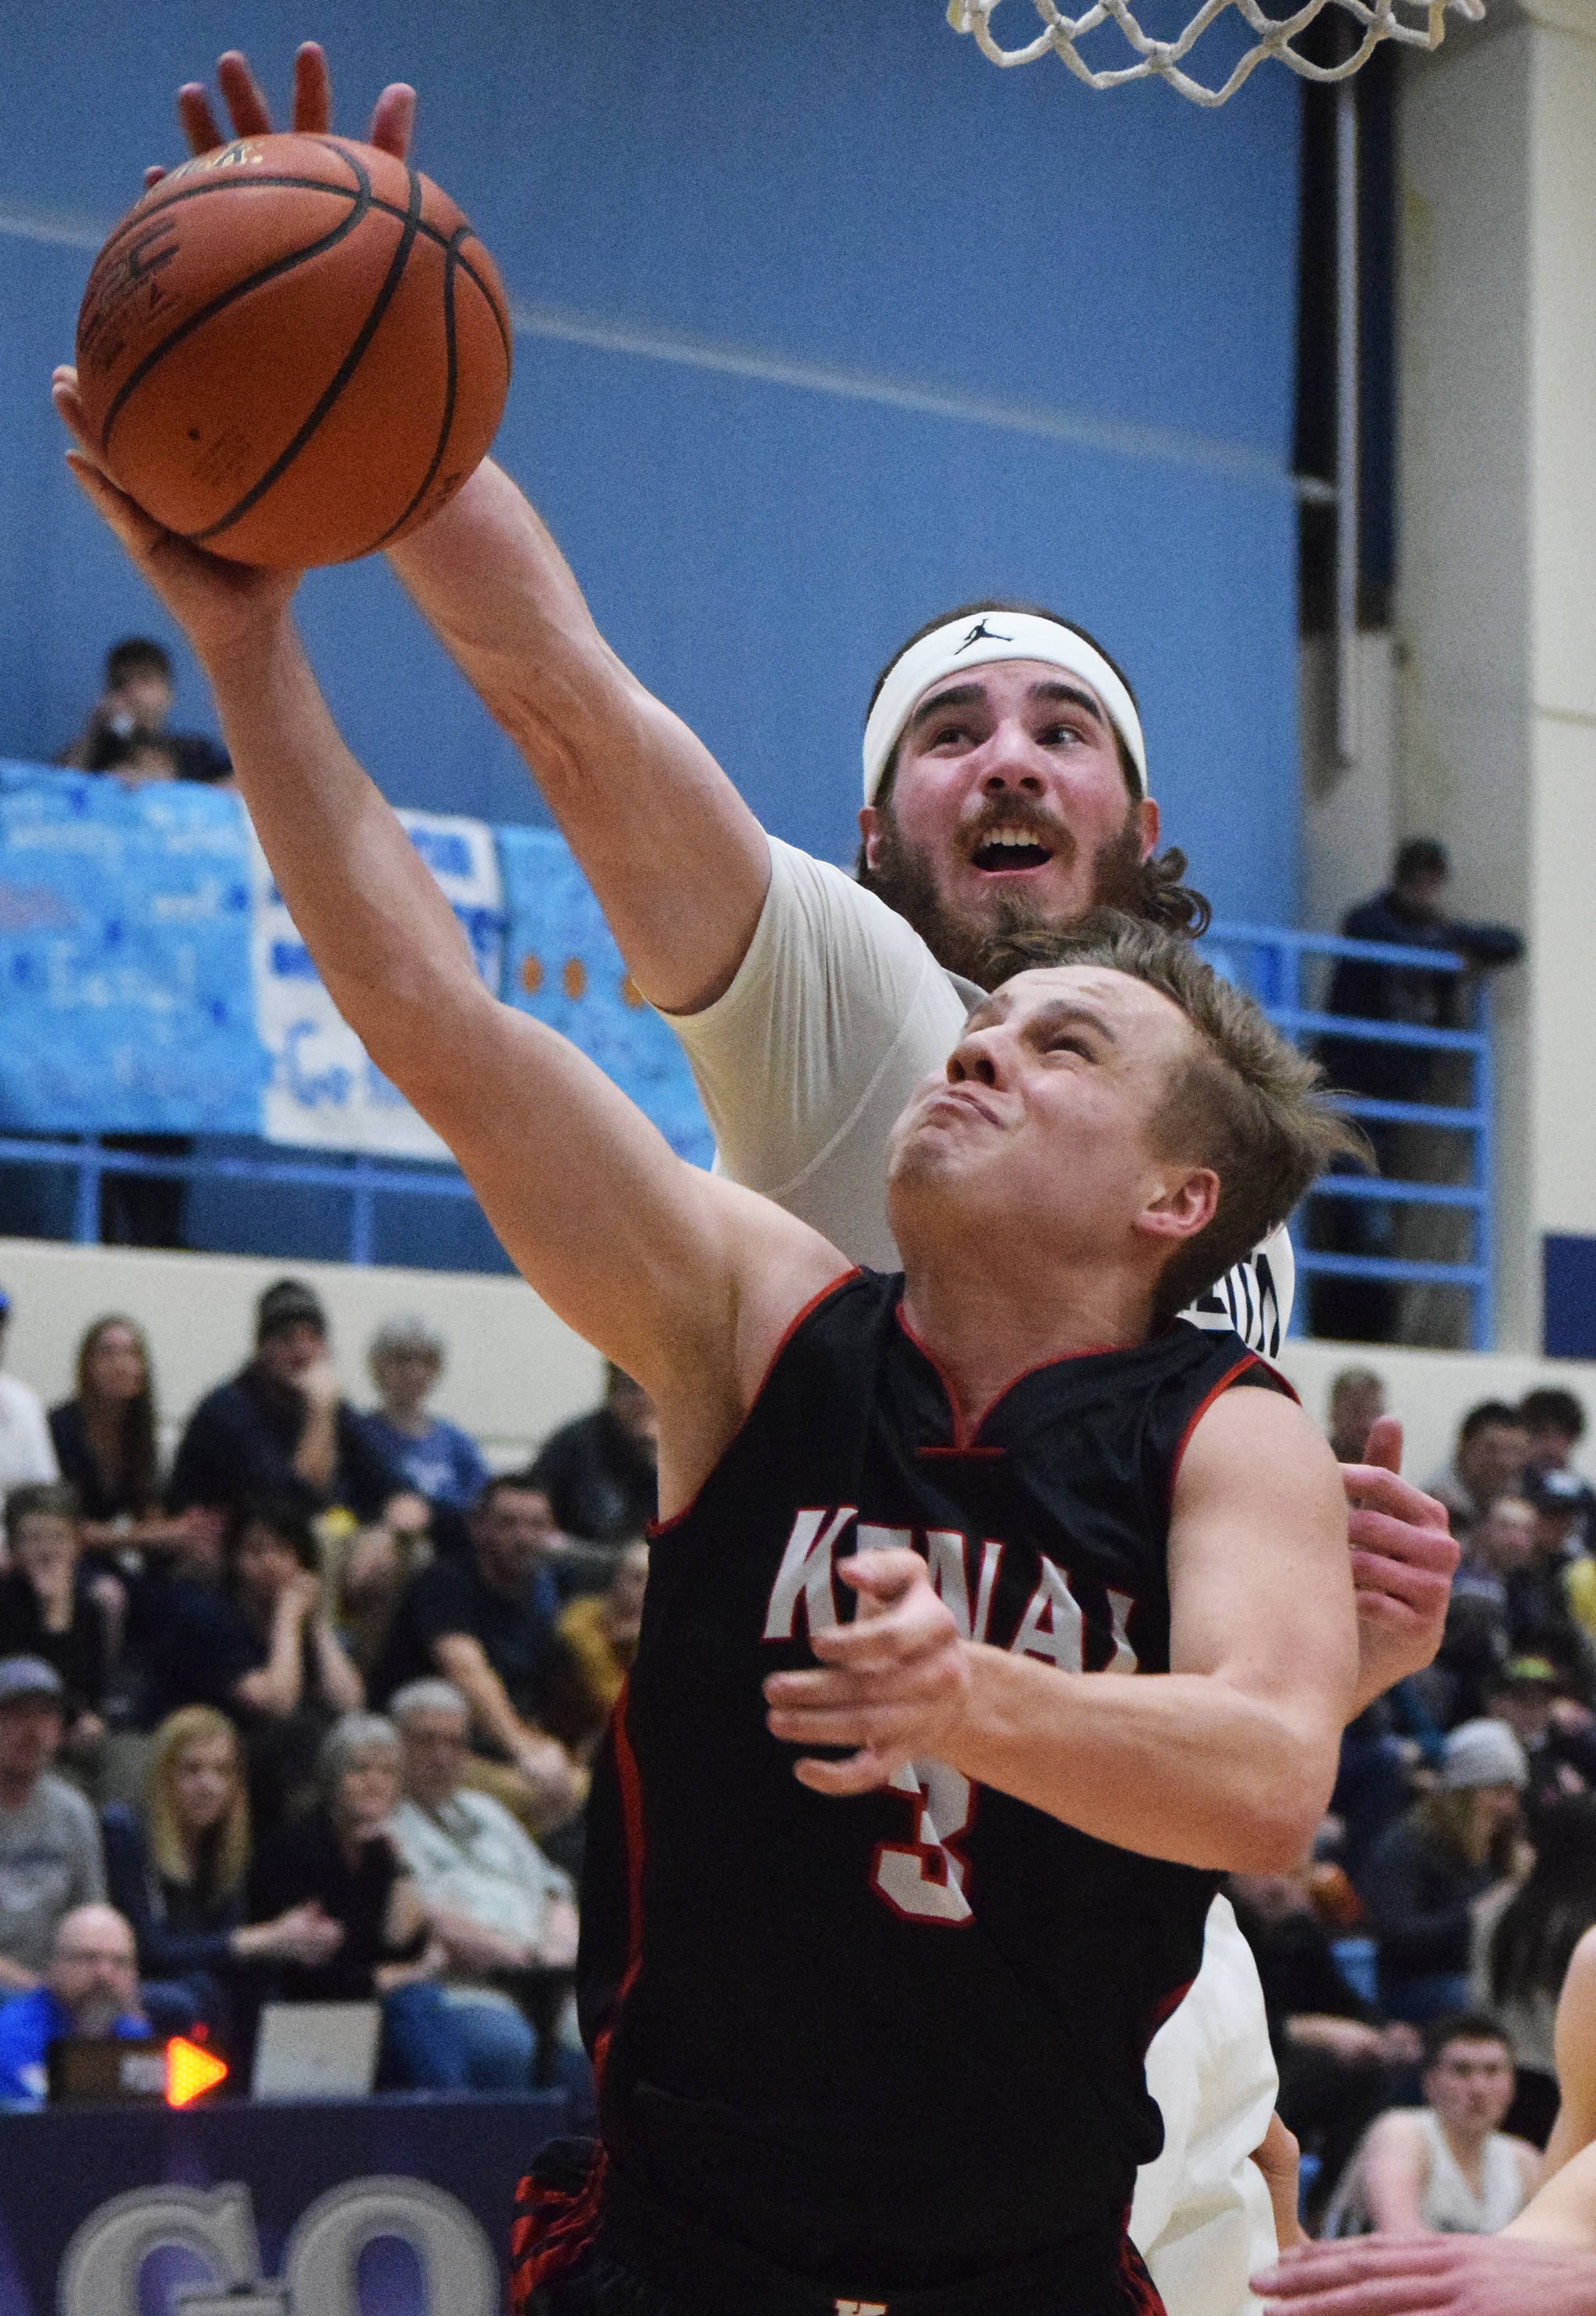 Soldotna’s David Michael (background) puts a block on Kenai’s Connor Felchle Tuesday at Soldotna High School. (Photo by Joey Klecka/Peninsula Clarion)